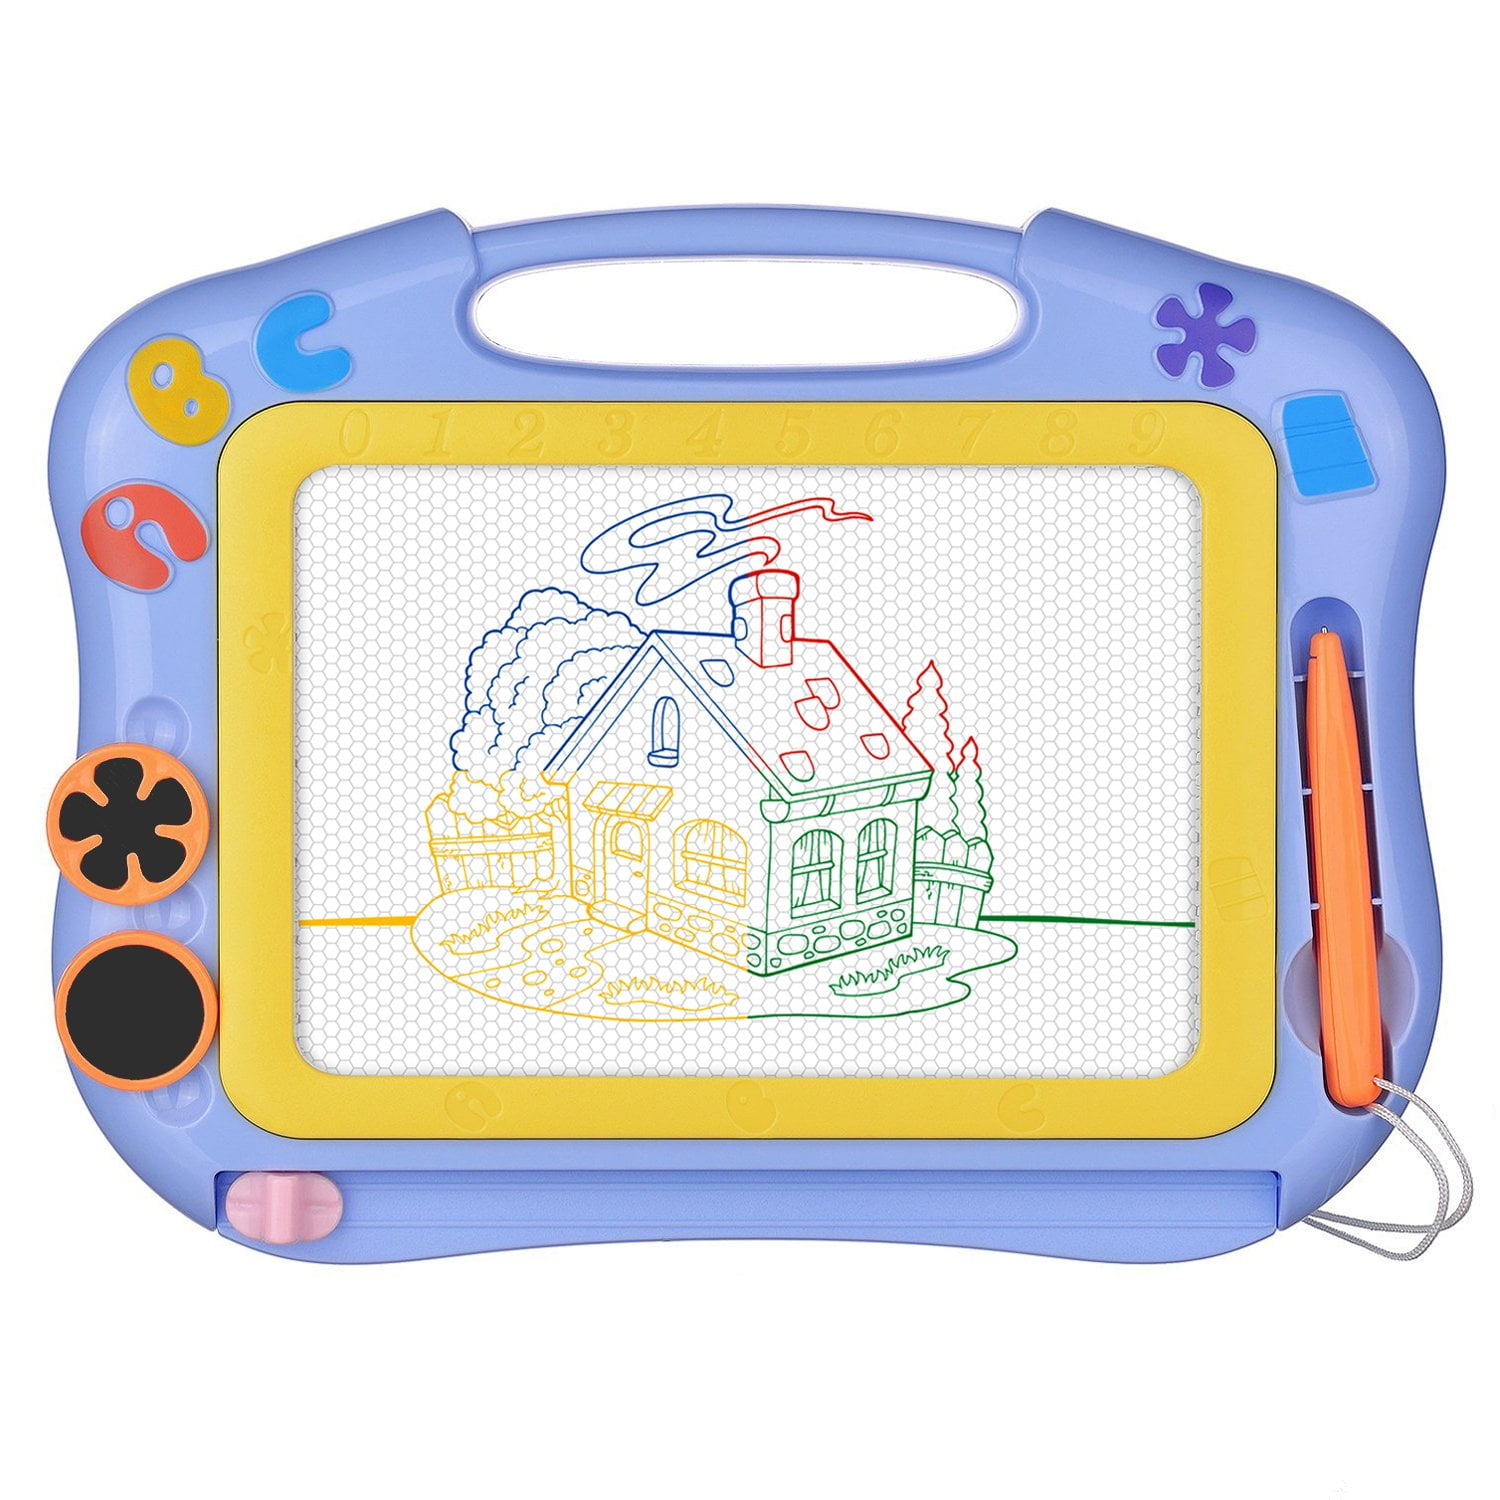 The Manga drawing Board Features a Extra Large Writing Board with 8 color zones & Erasable slider to etch a sketch for all kids ages 2-13 ToyVelt MegaToyBrand Magna Doodle Magnetic Drawing Board for Kids